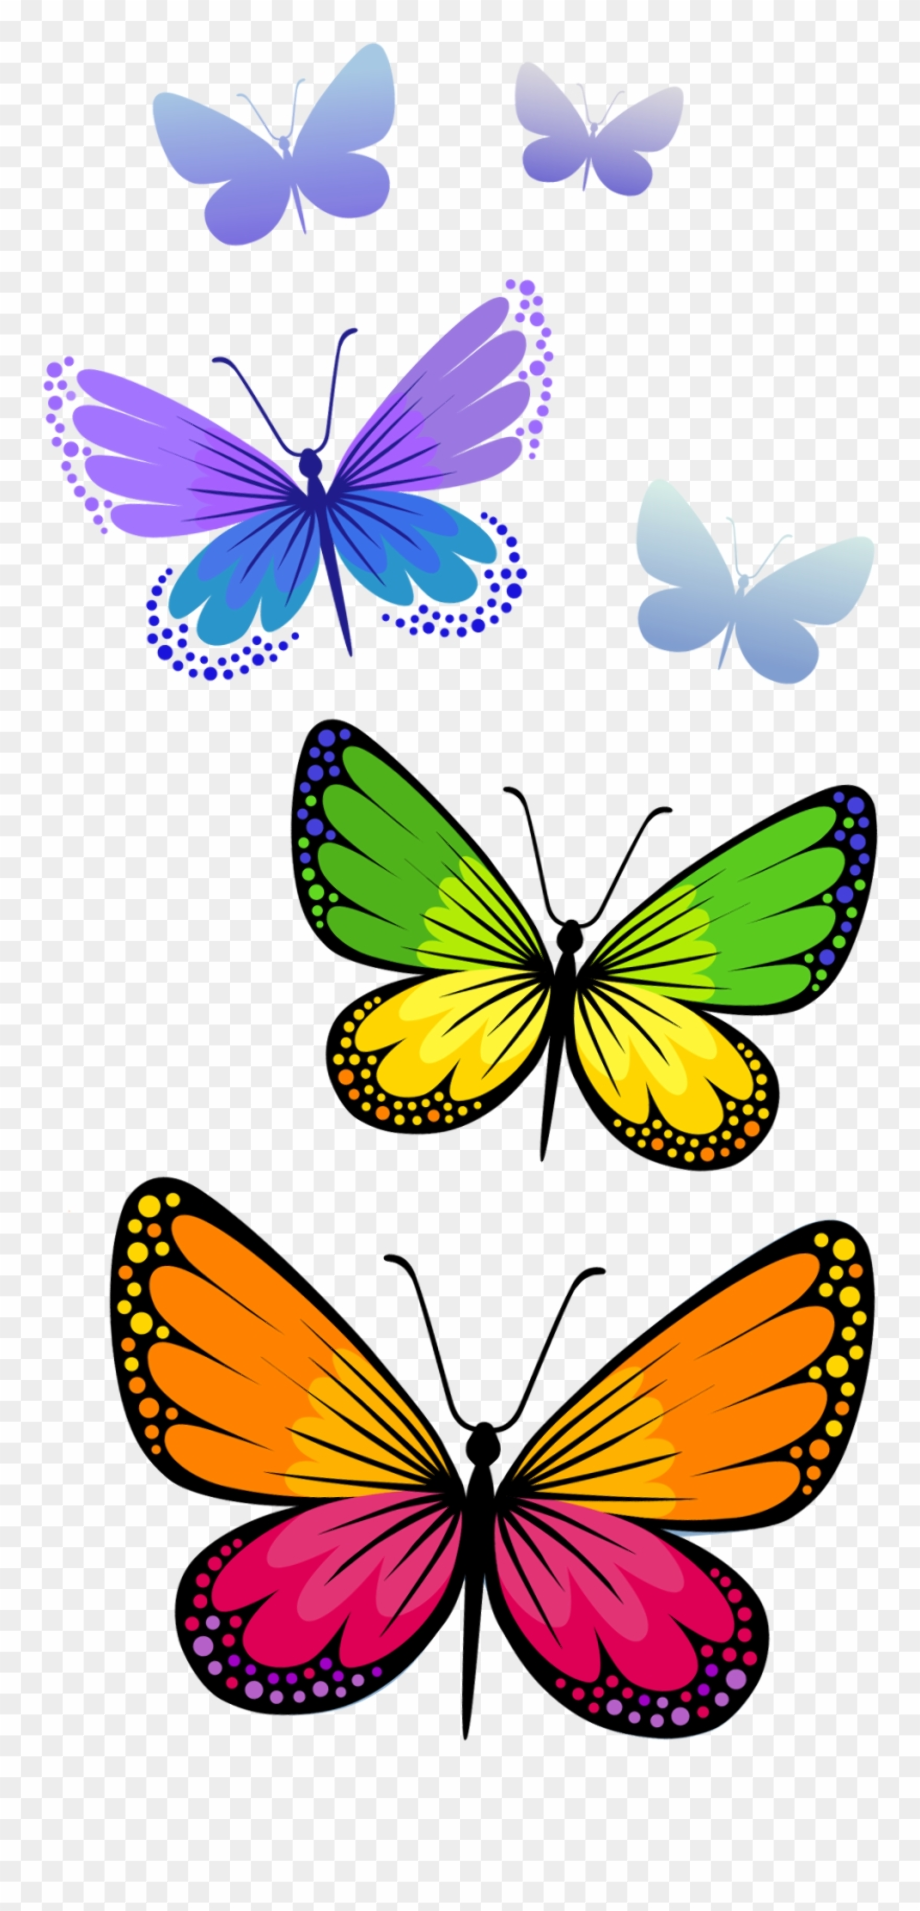 clipart free downloads butterfly